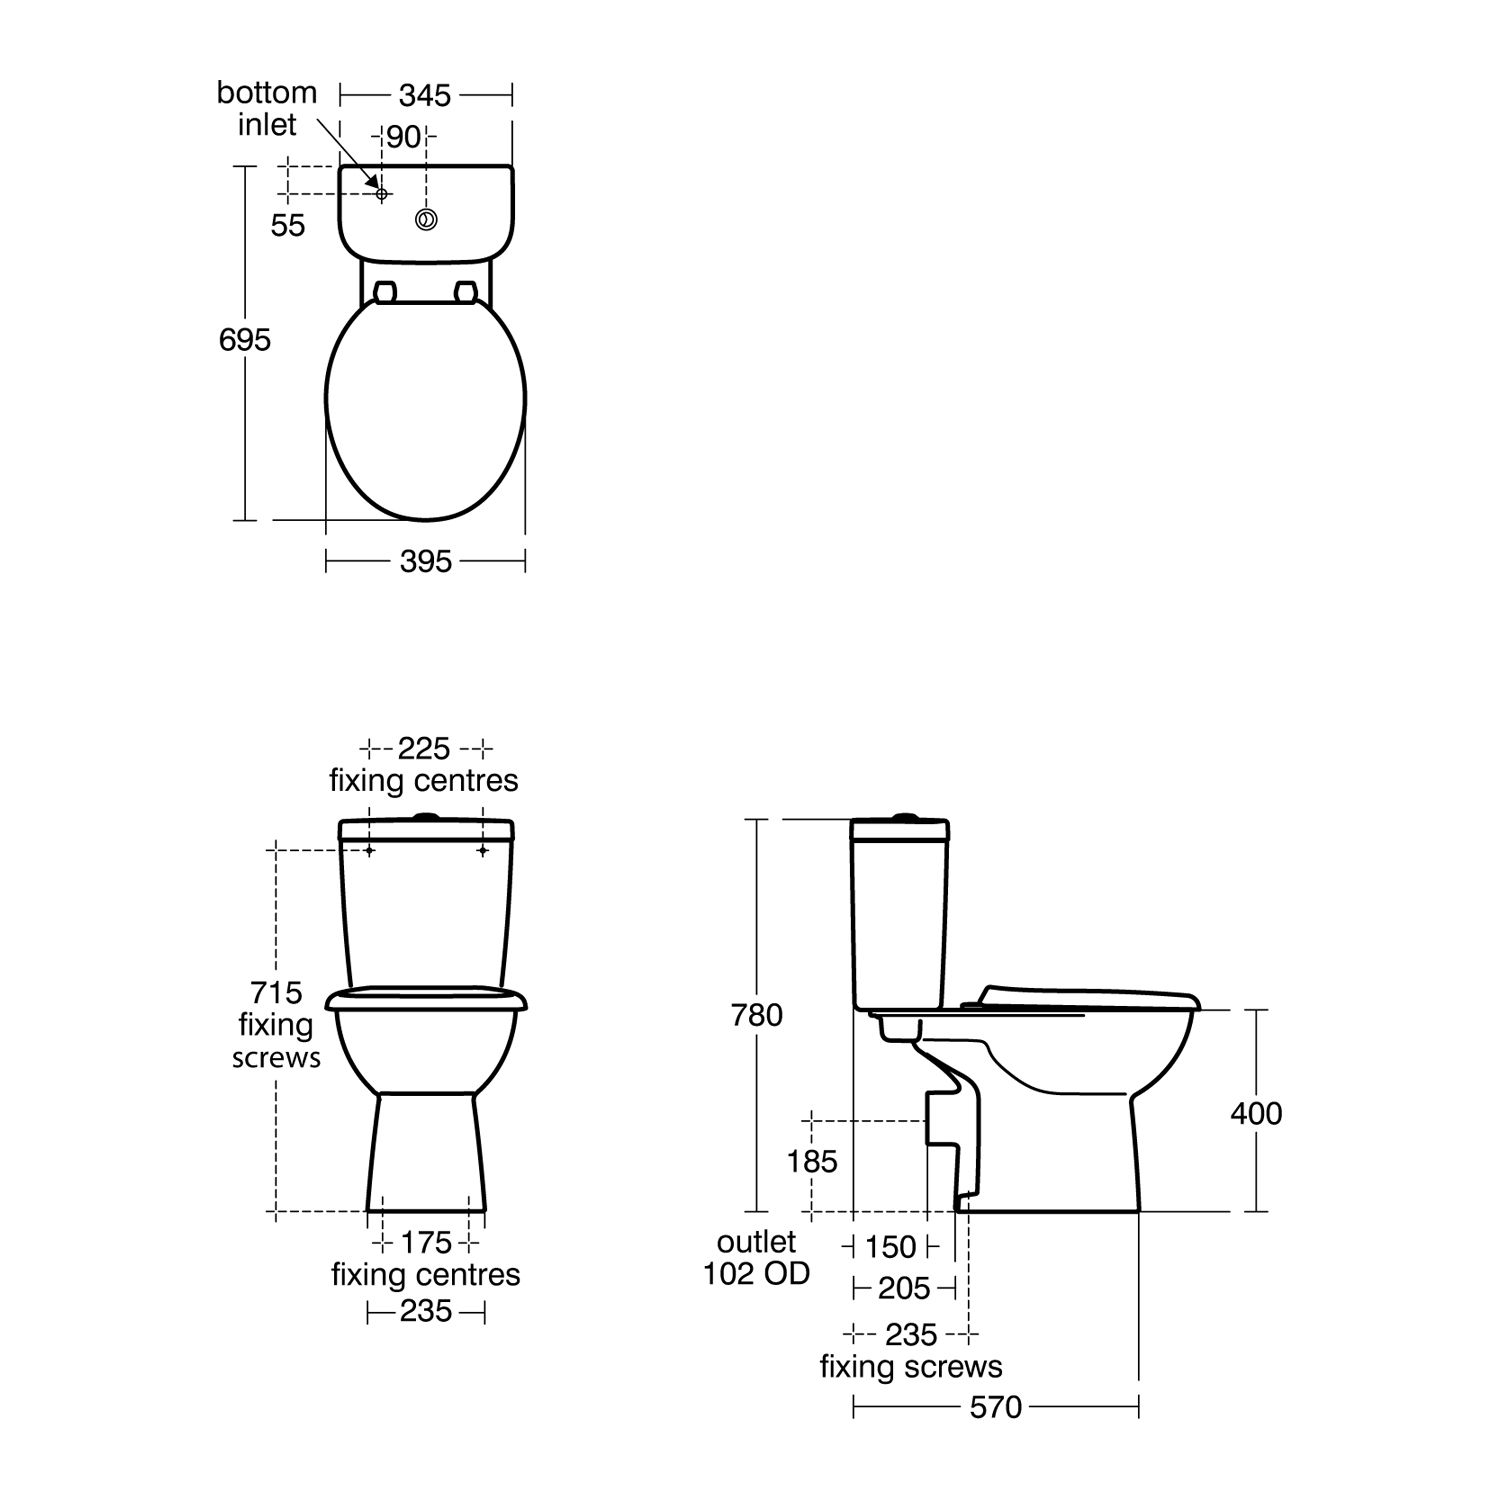 Armitage Shanks Sandringham 21 Smooth White Close-coupled Toilet set with Soft close seat